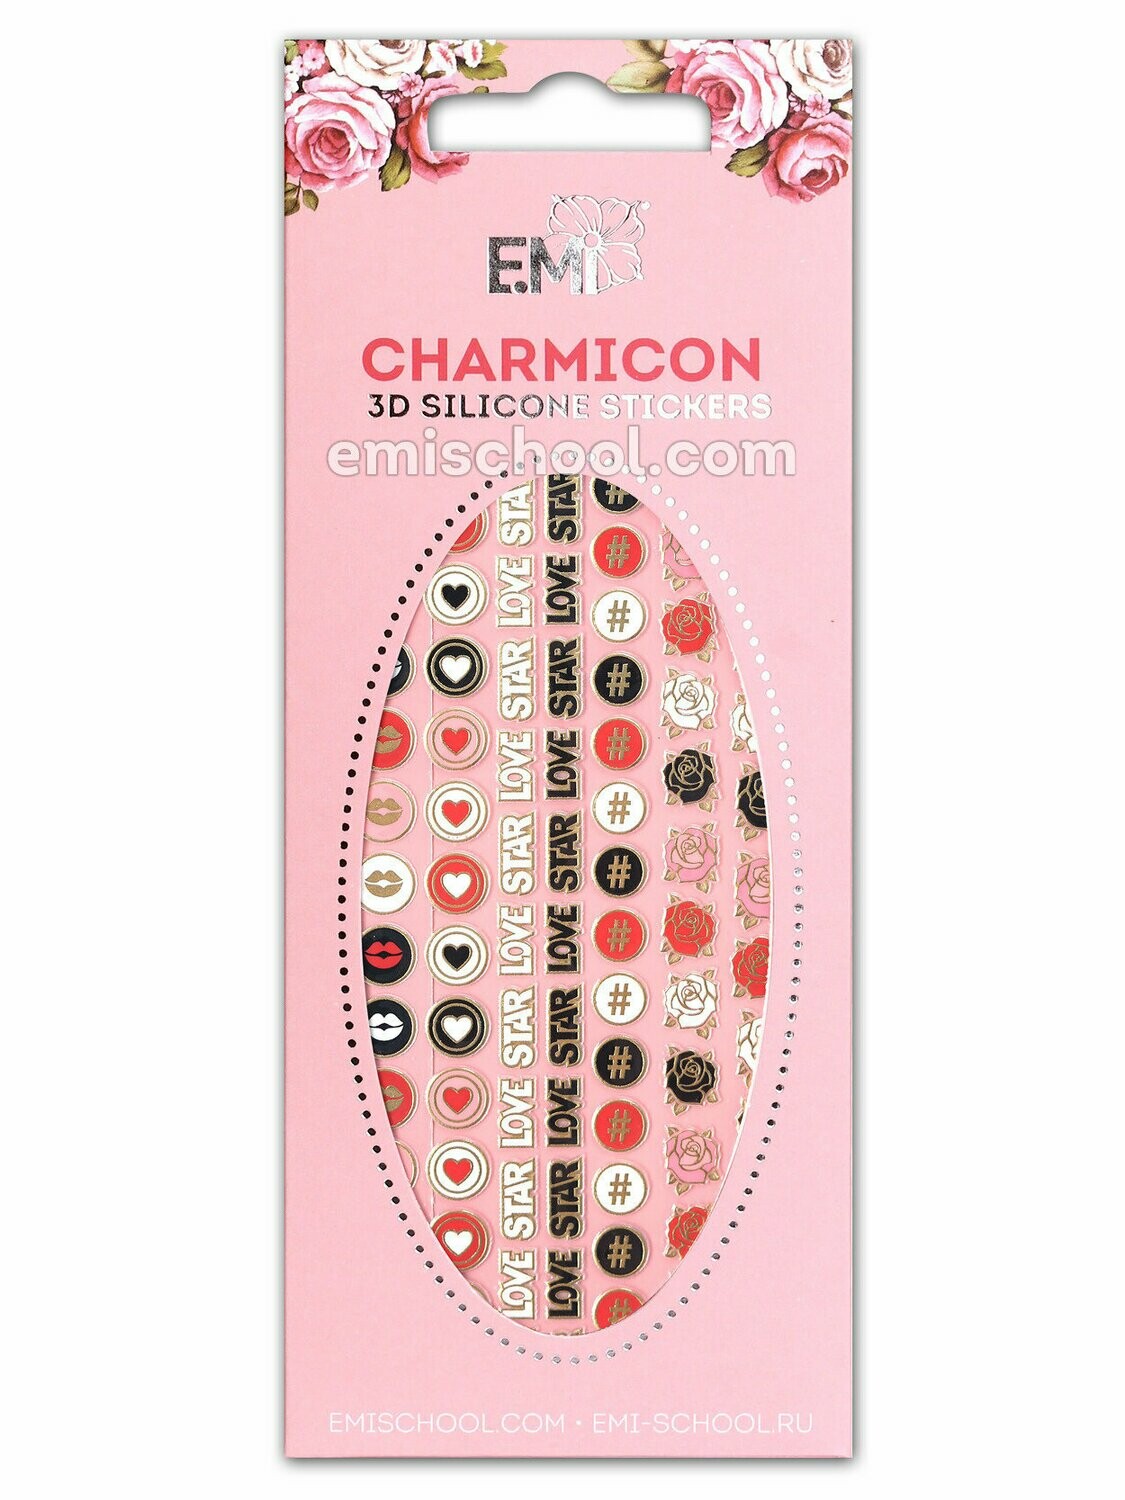 Charmicon 3D Silicone Stickers #58 Icons